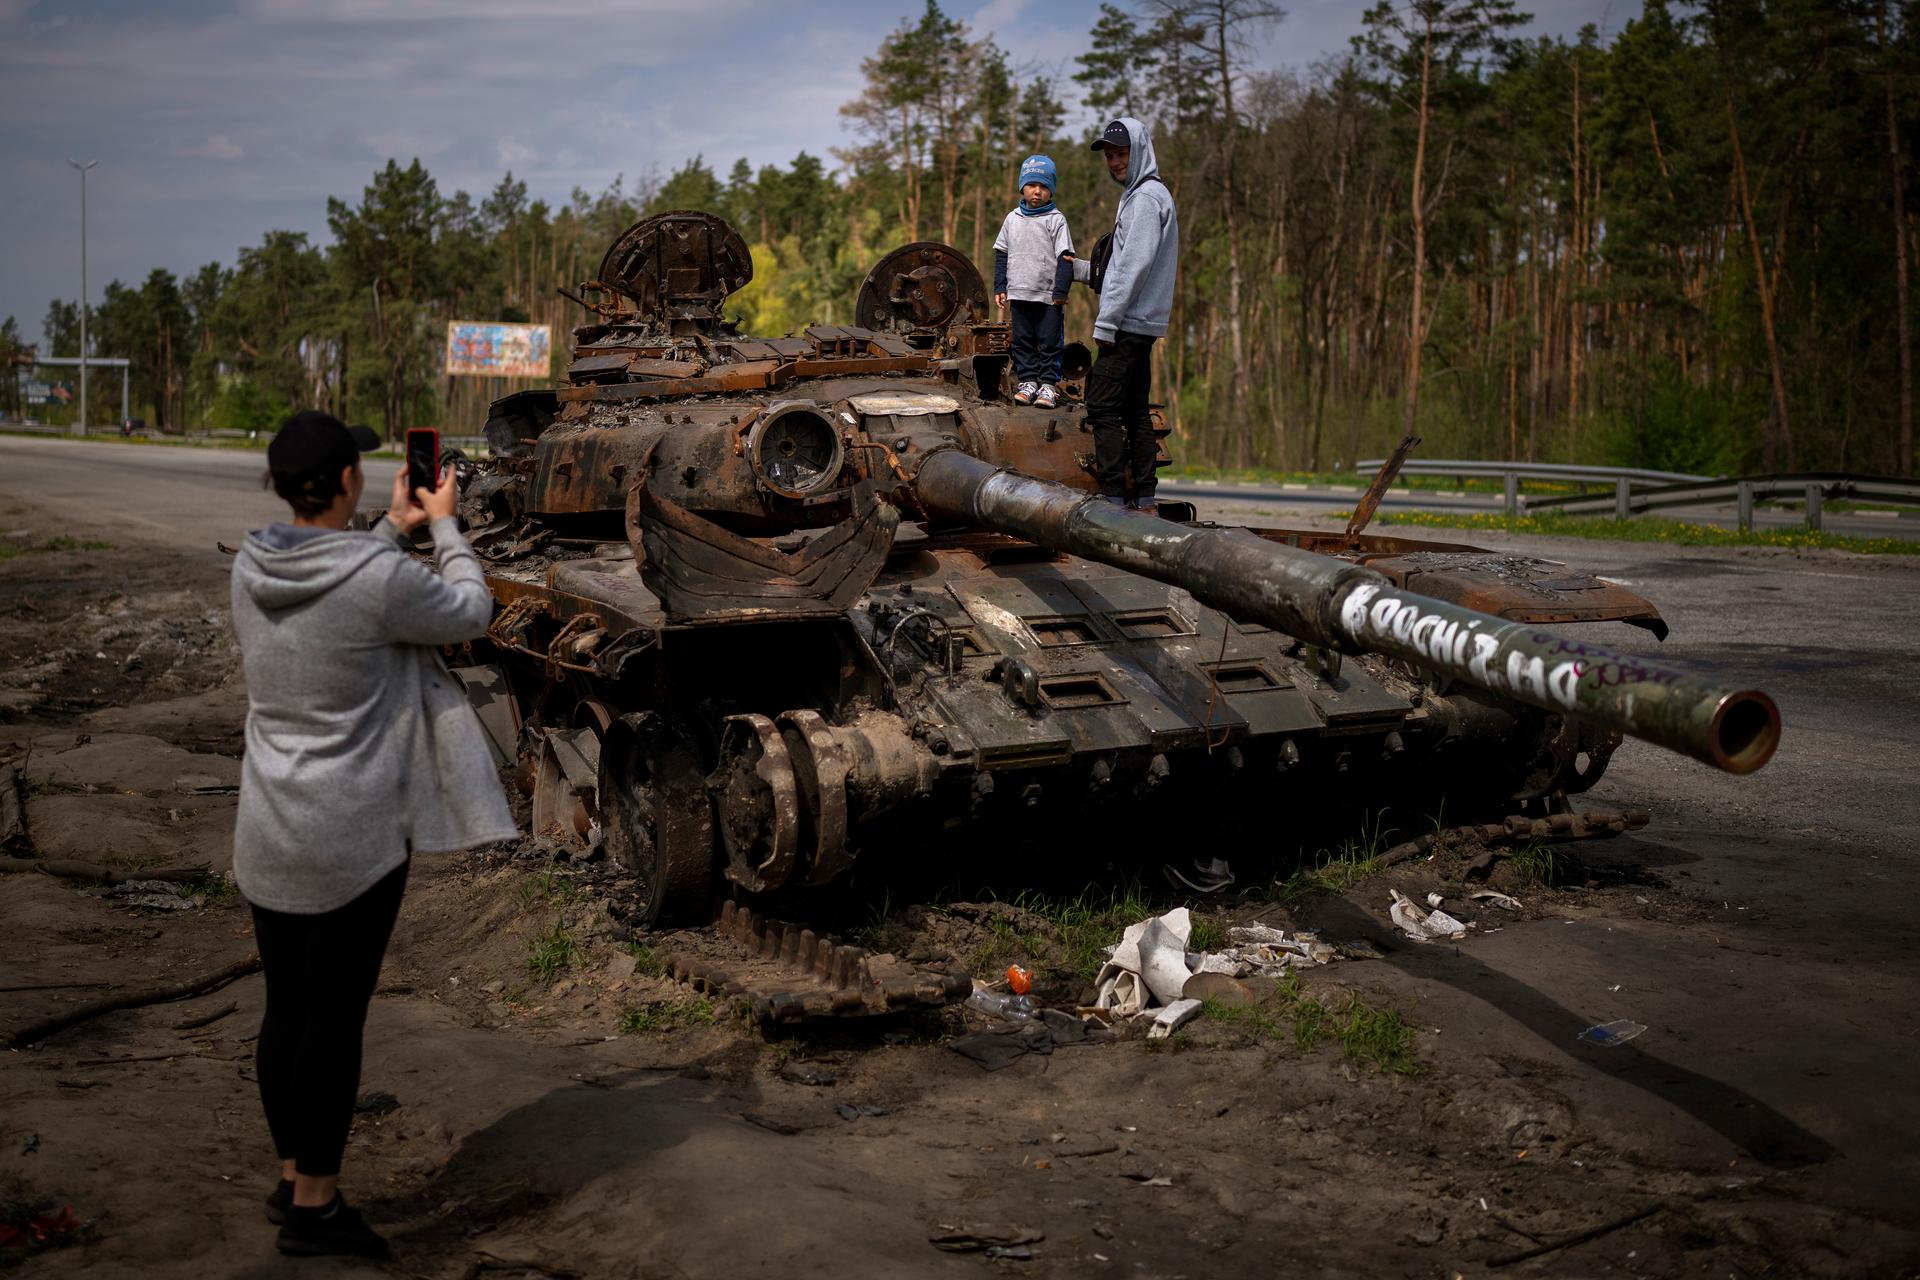 Russia is losing tanks at an astonishing rate. 